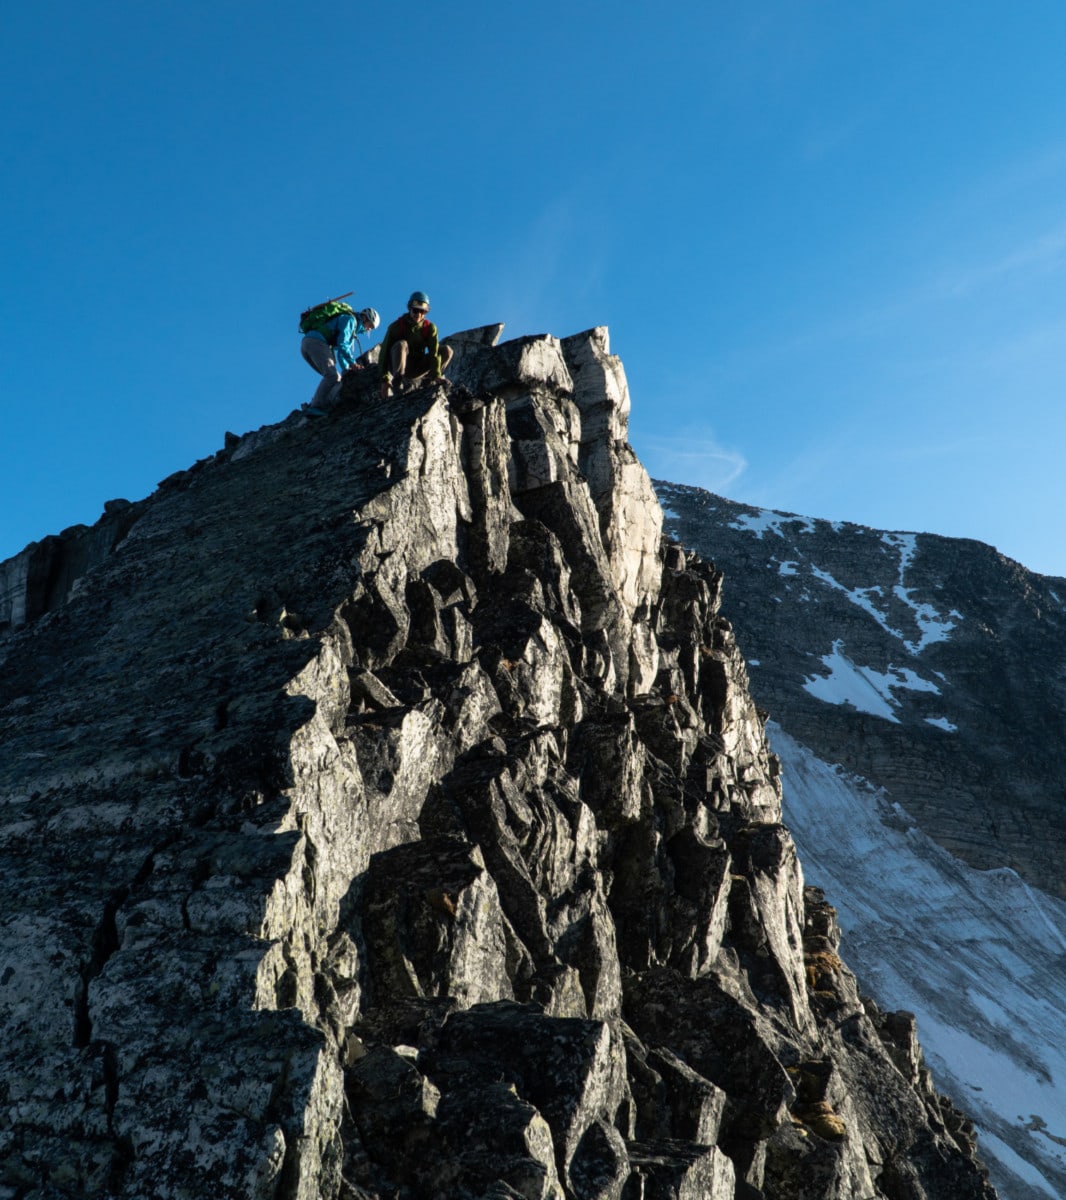 climbers descending during the sunset